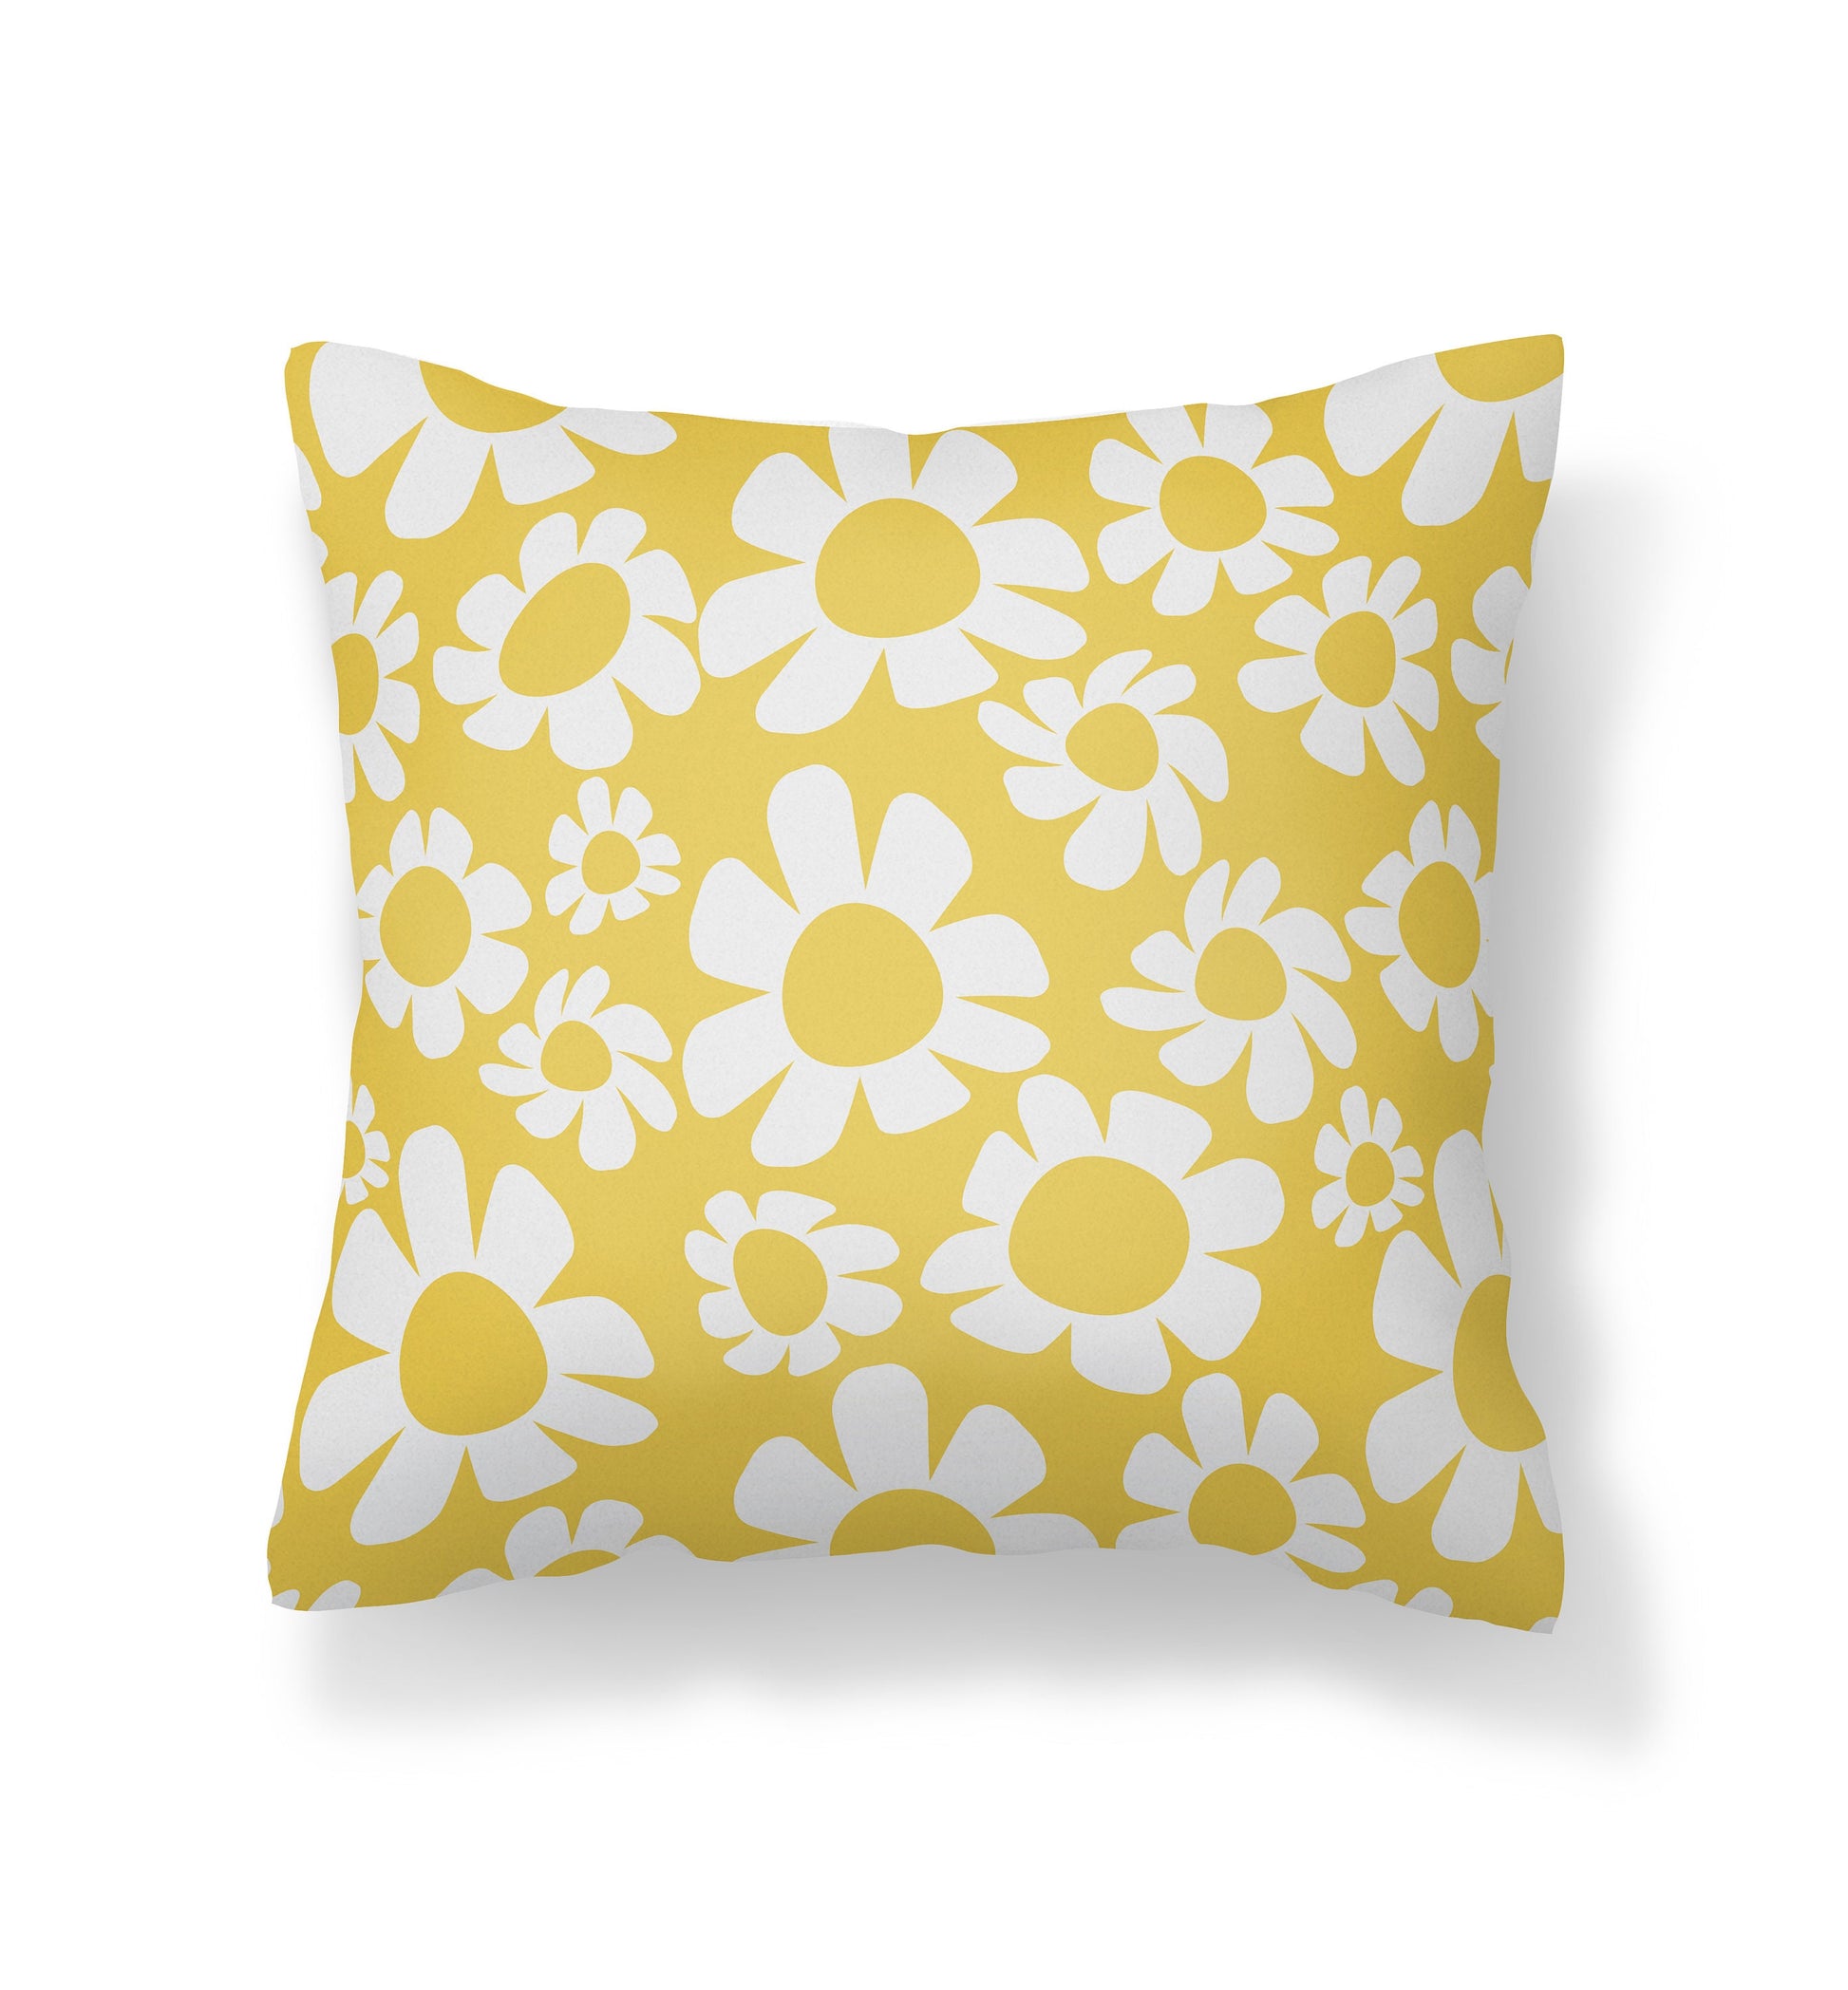 Outdoor Floral Pillow - Yellow and White Retro Daisies Pillow